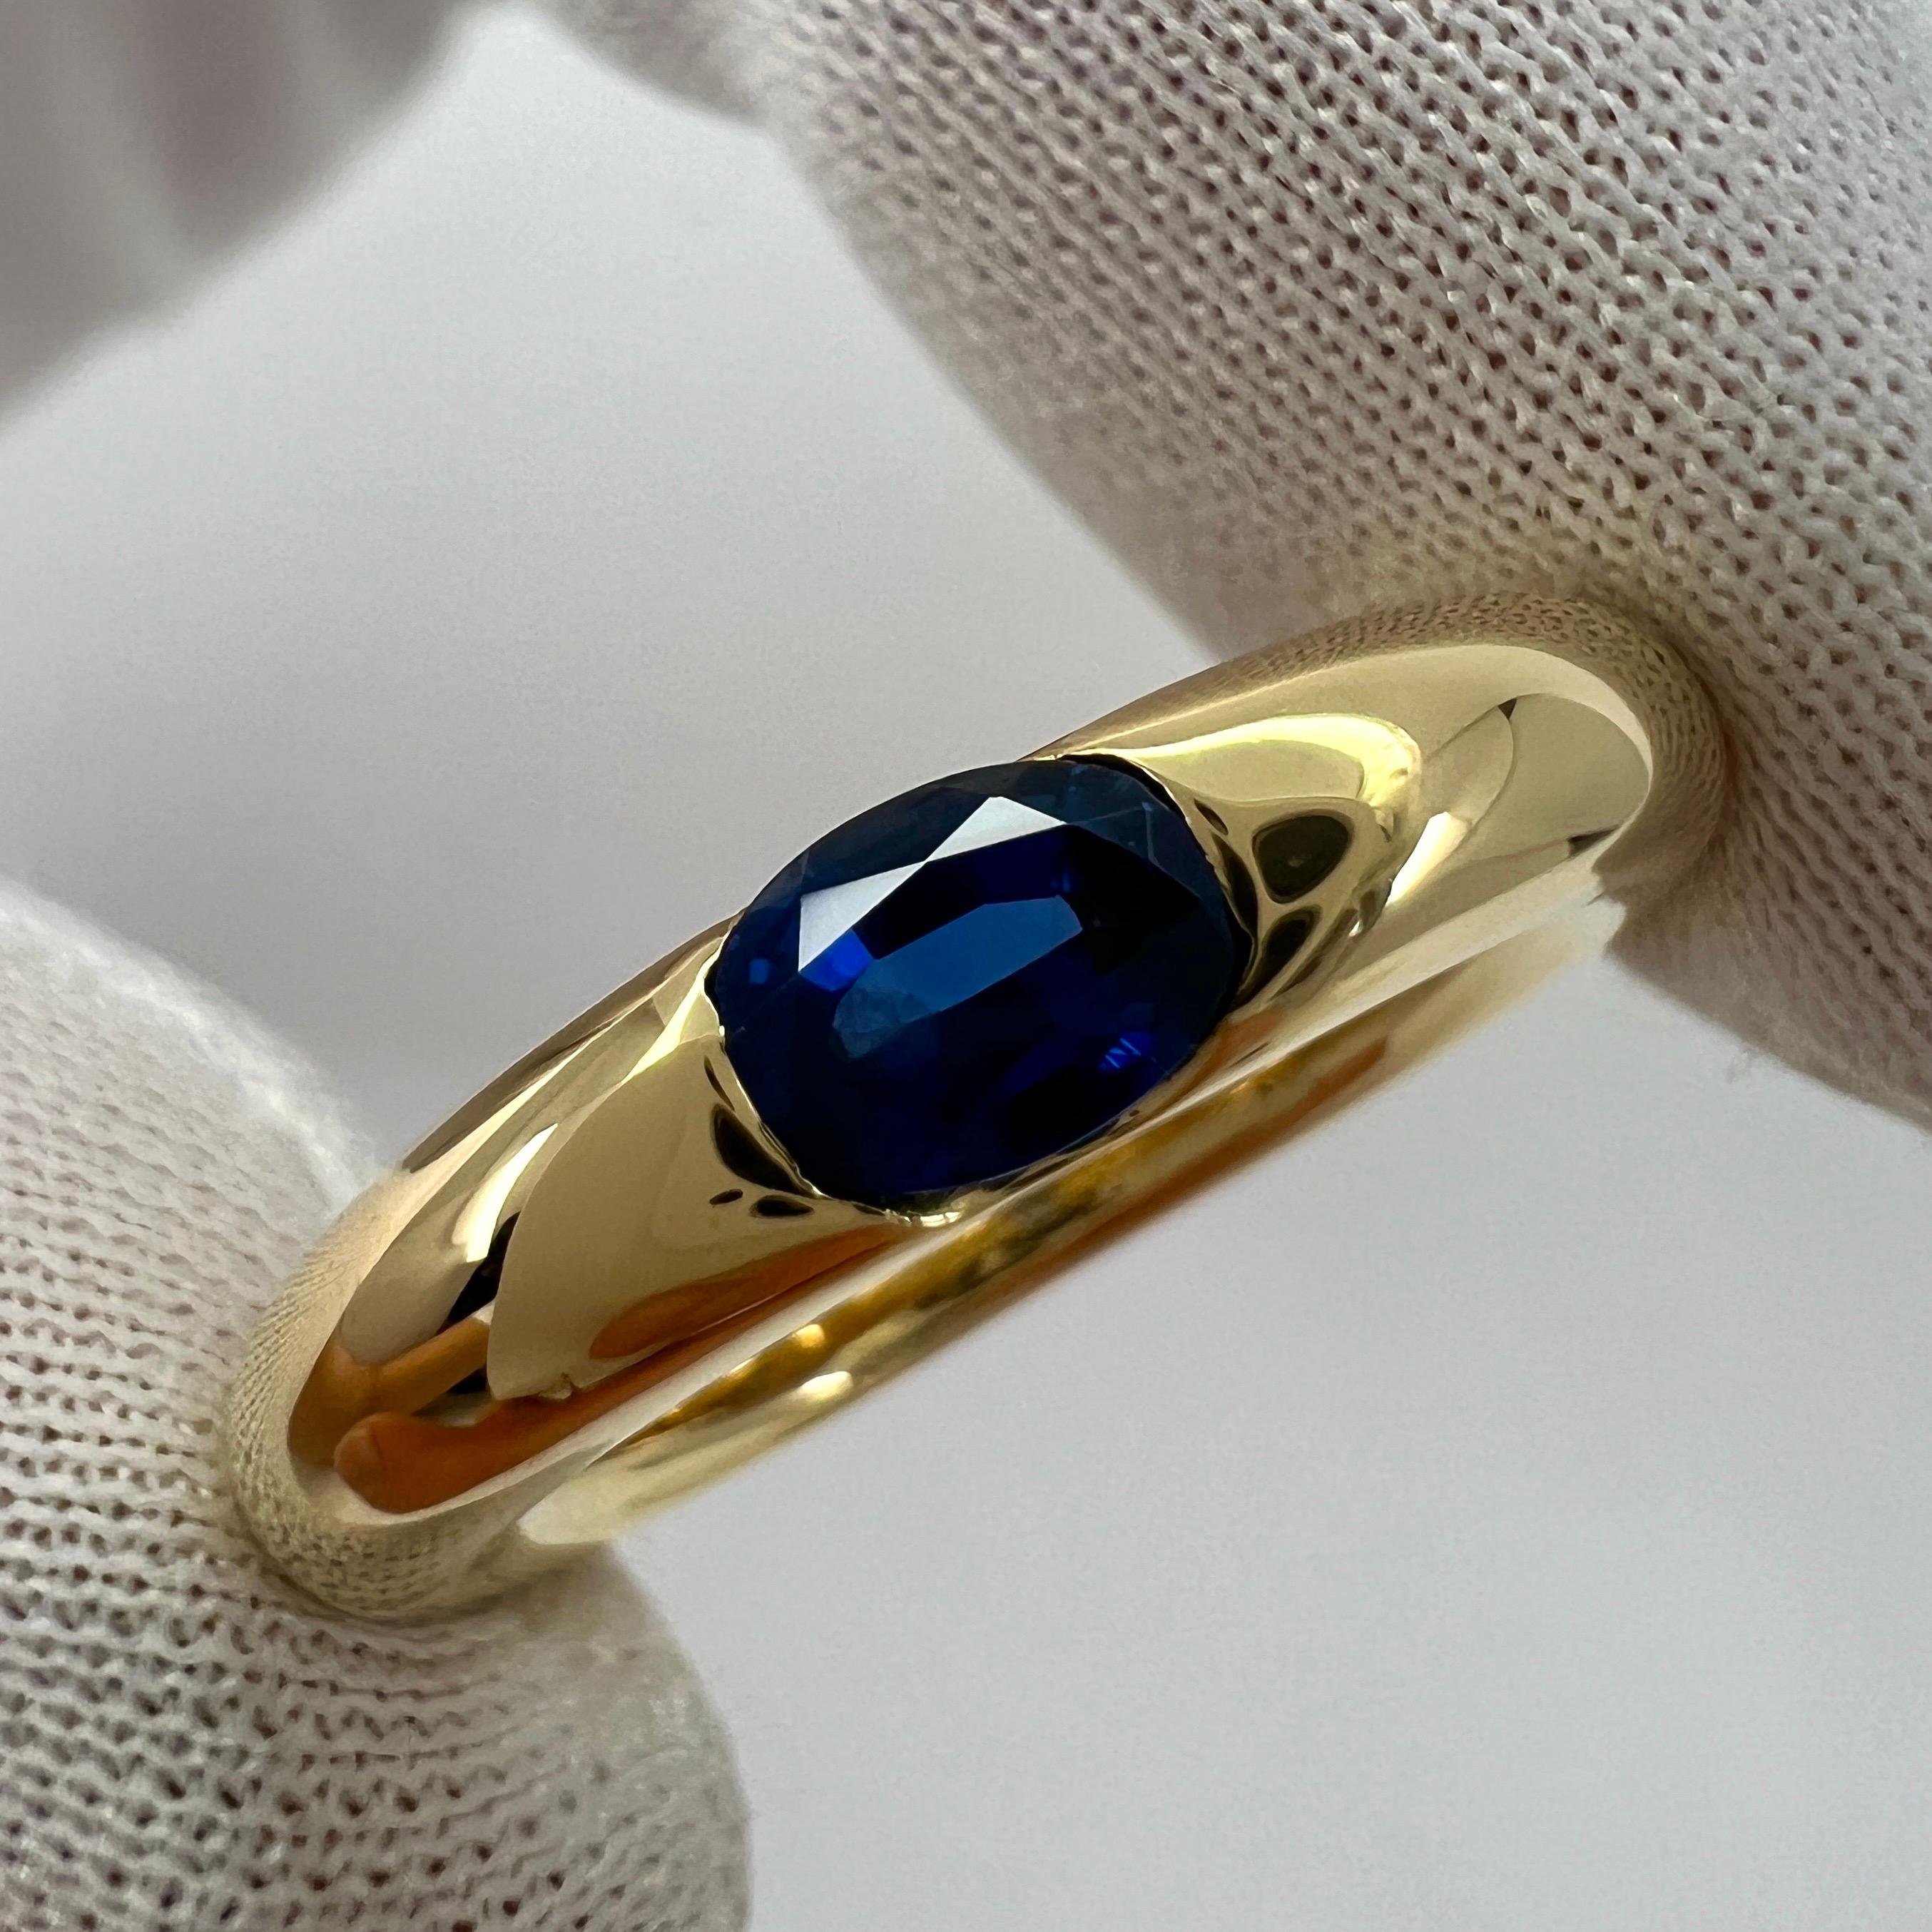 Vintage Cartier Blue Sapphire Oval Ellipse 18k Yellow Gold Solitaire Ring 51 6